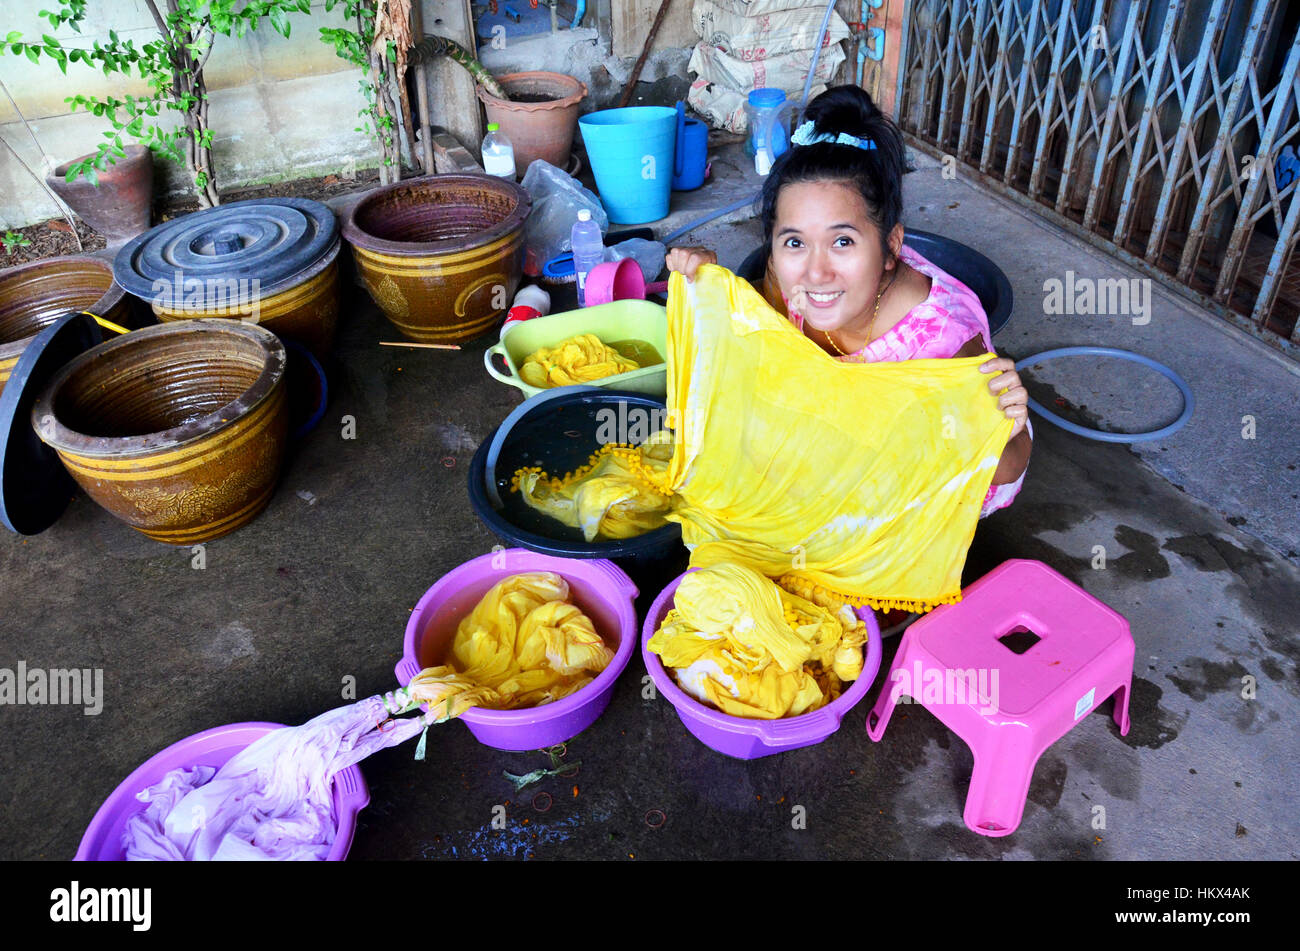 Woman Wash Hands Dirty Clothes In The Basin Black For Cleansing,Thailand Washing  Clothes Style Ancient And Soak With Detergent In The Evening. Stock Photo,  Picture and Royalty Free Image. Image 72016819.